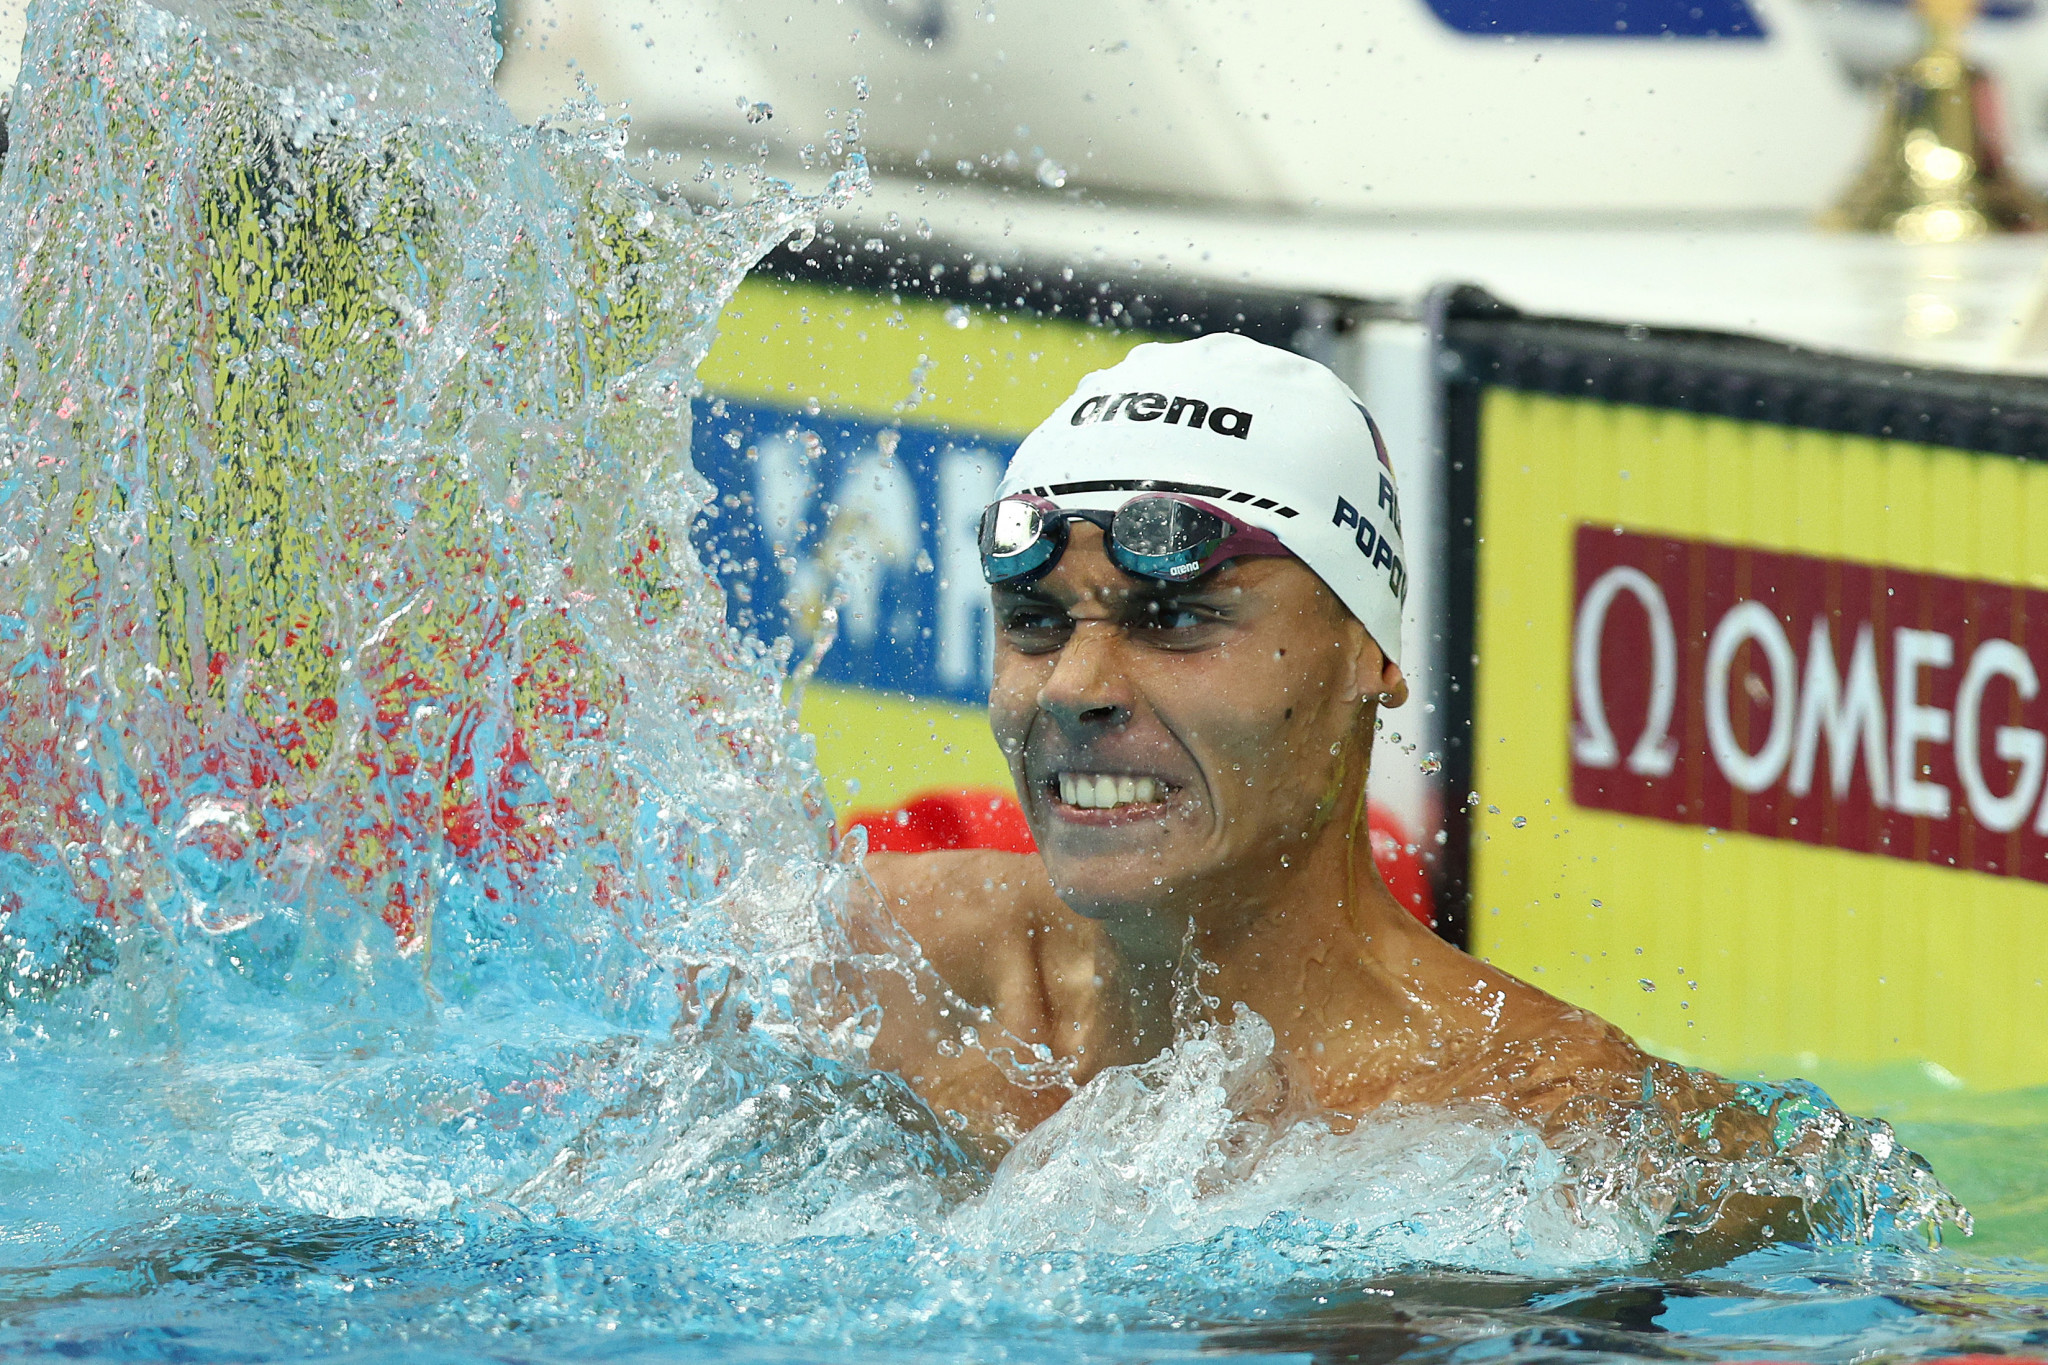 David Popovici broke the men's 200m freestyle world junior record and became the first Romanian male swimmer to win gold at the FINA World Championships ©Getty Images